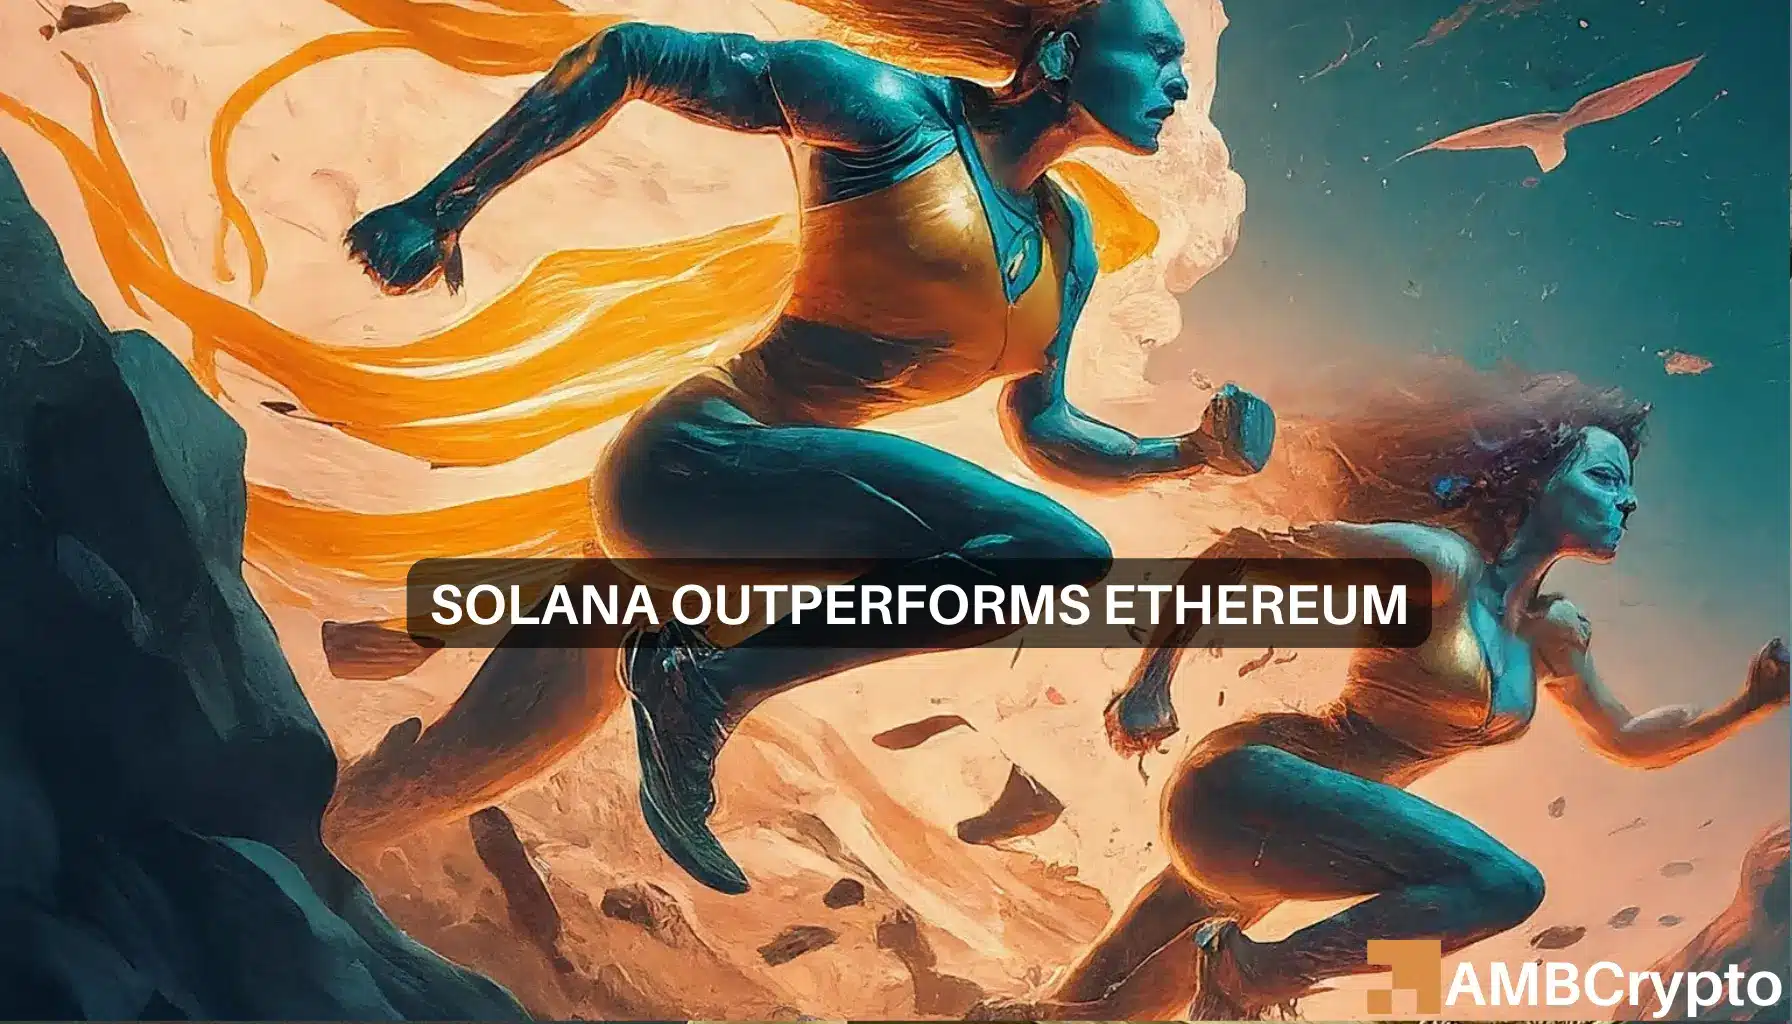 Solana’s memecoin mania: Leads Ethereum by 800%